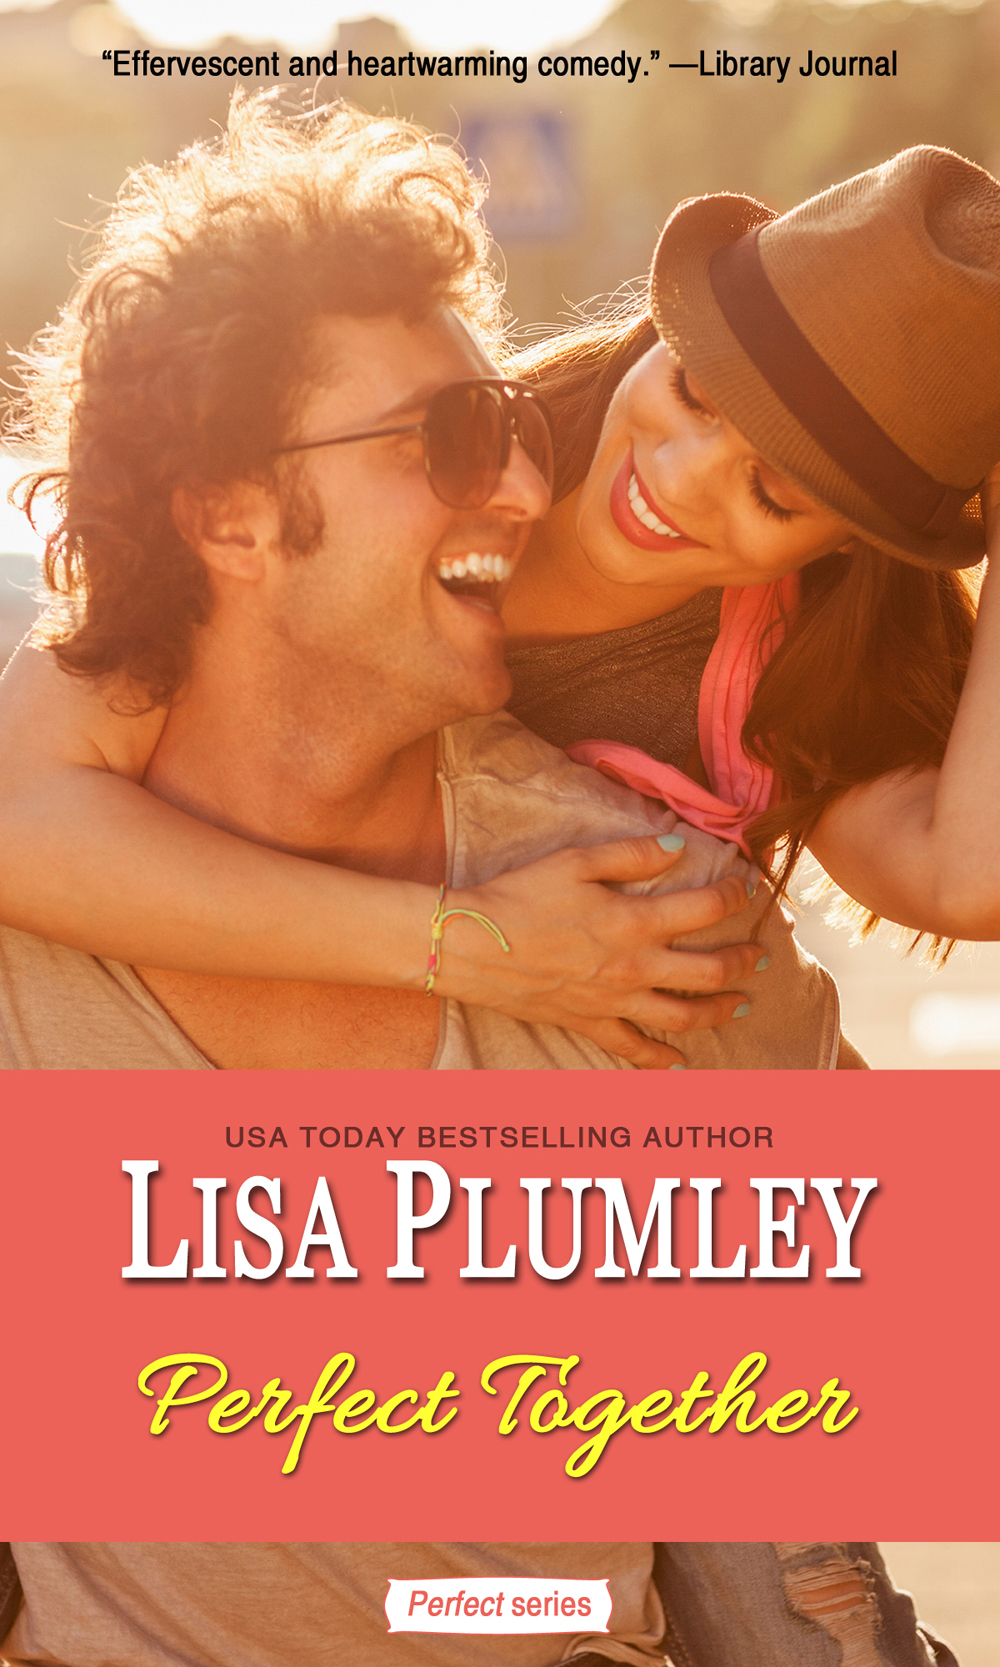 Perfect Together by Lisa Plumley